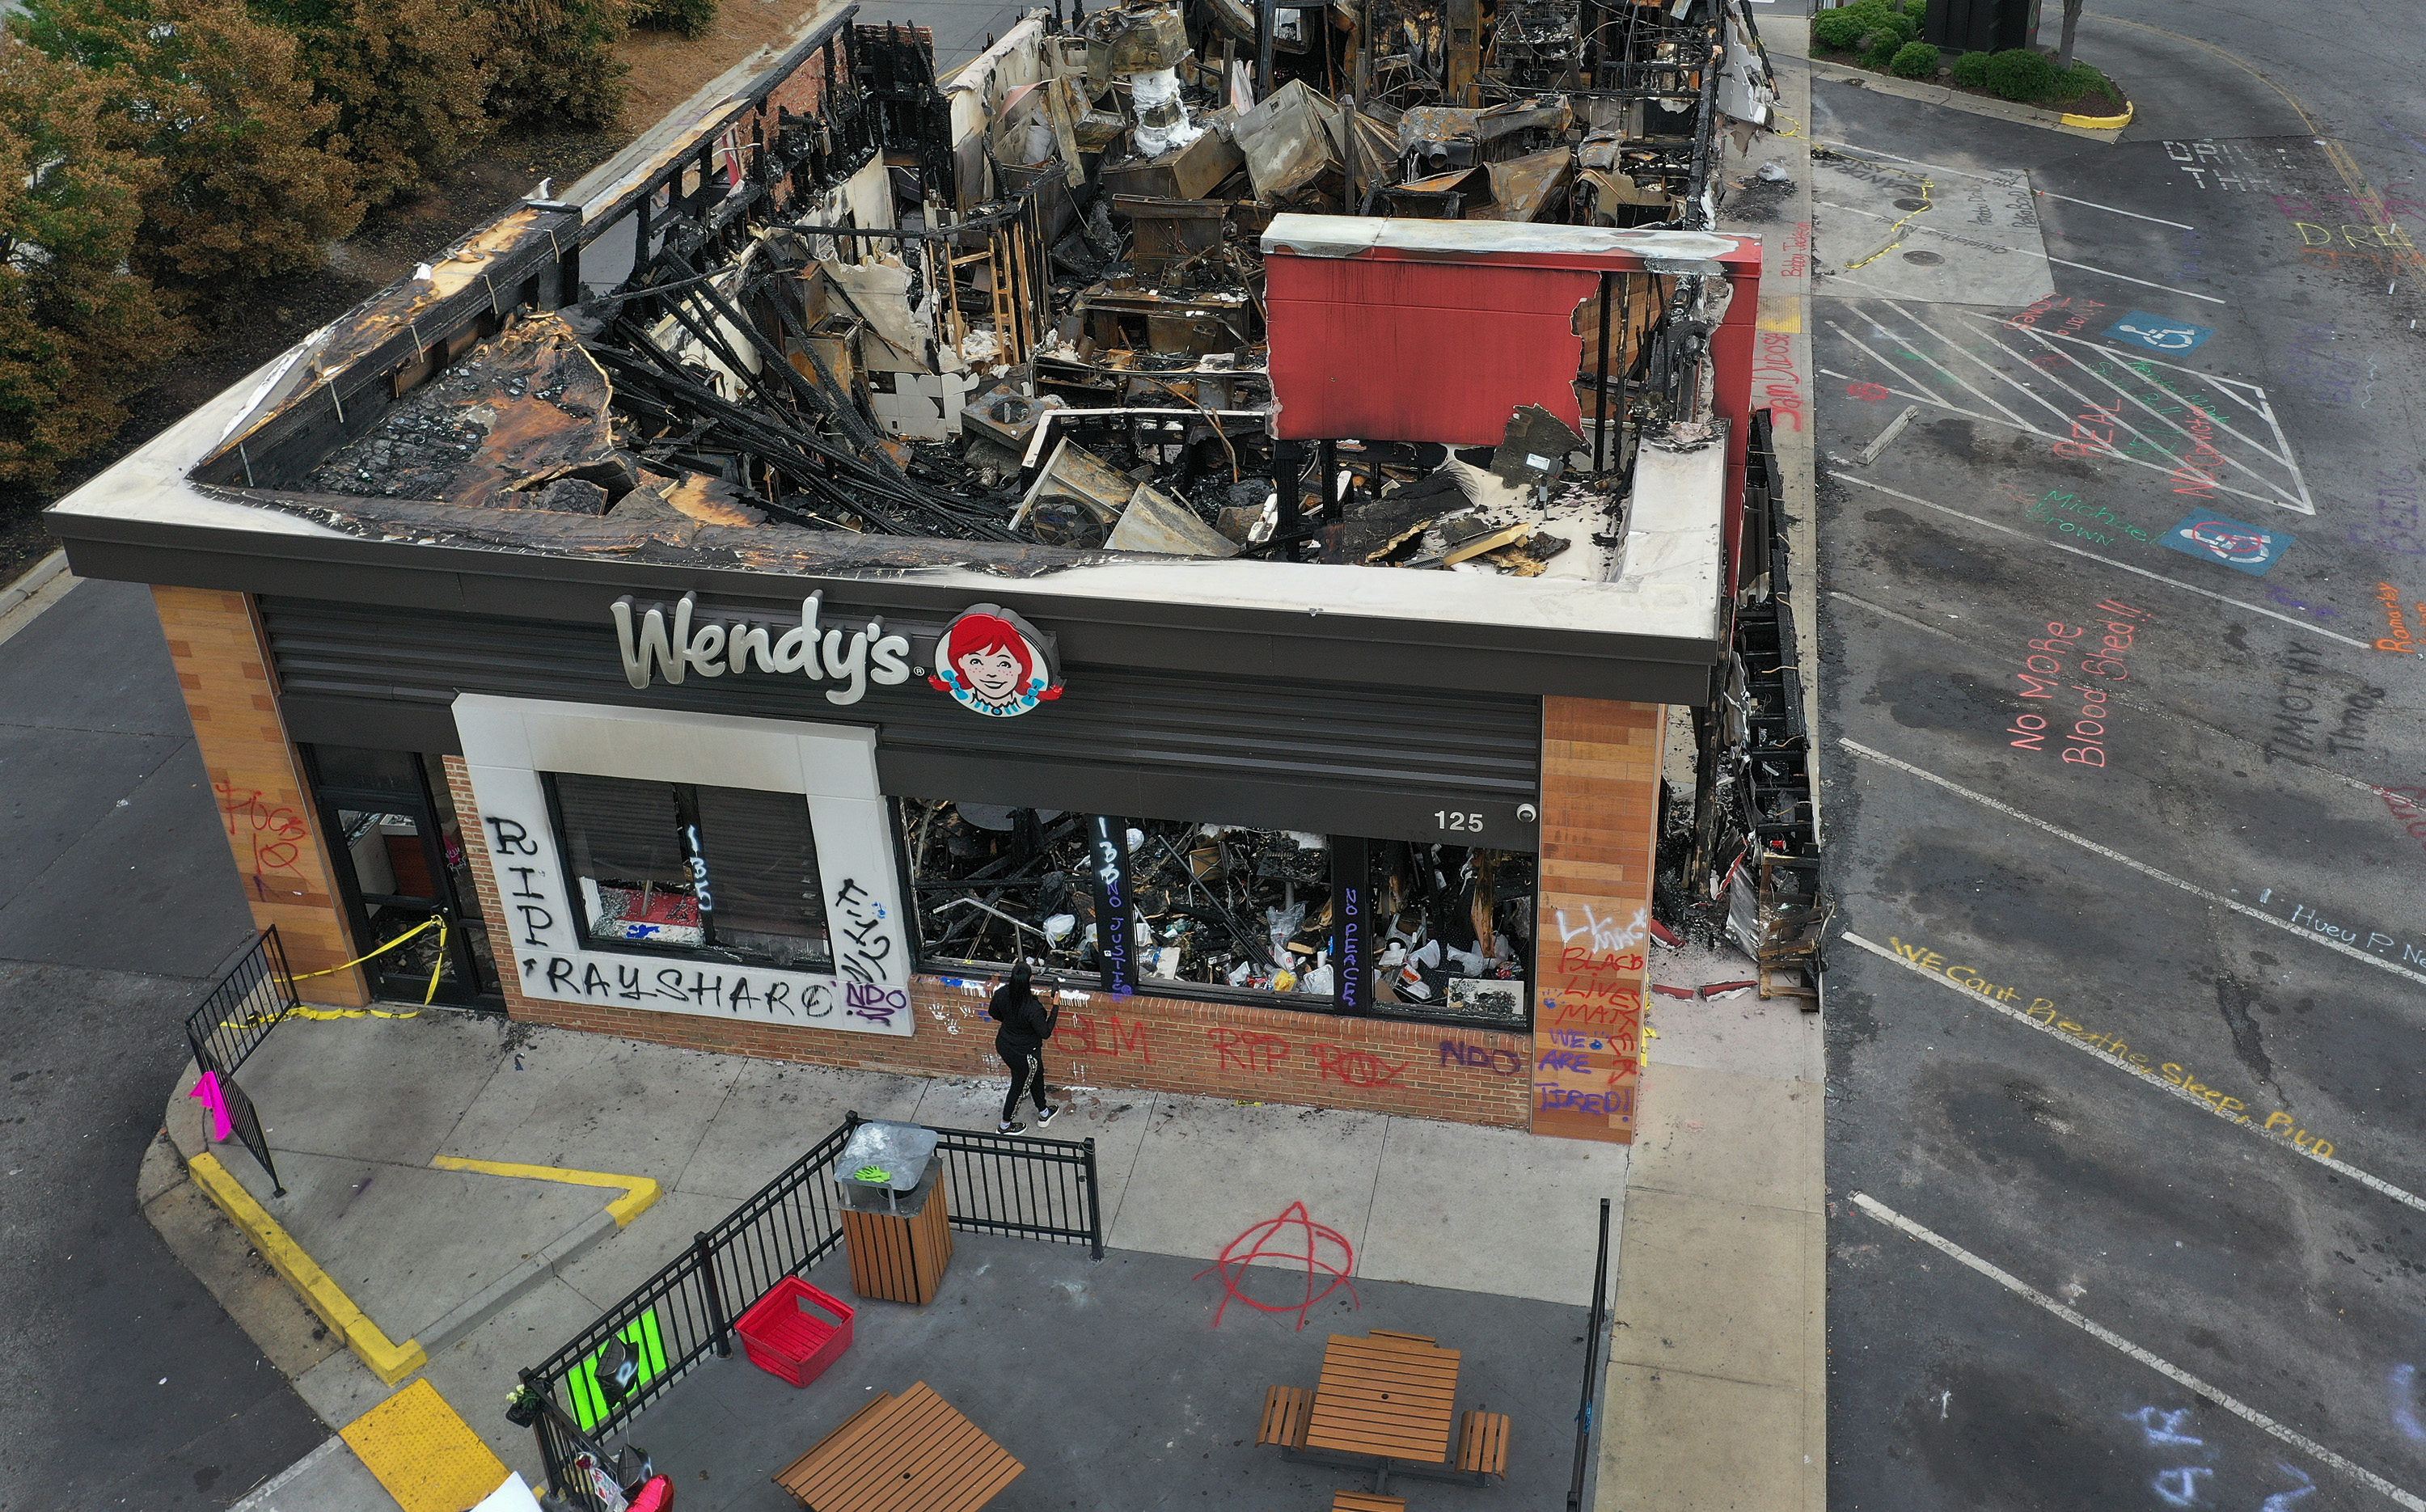 ATLANTA, GEORGIA - JUNE 17: In this aerial photo, the Wendy's restaurant that was set on fire by demonstrators after Rayshard Brooks was killed is seen on June 17, 2020 in Atlanta, Georgia. The site has become a place of remembrance for Mr. Brooks, who was killed by police while fleeing after a struggle during a field sobriety test in the Wendy's parking lot. (Photo by Joe Raedle/Getty Images)